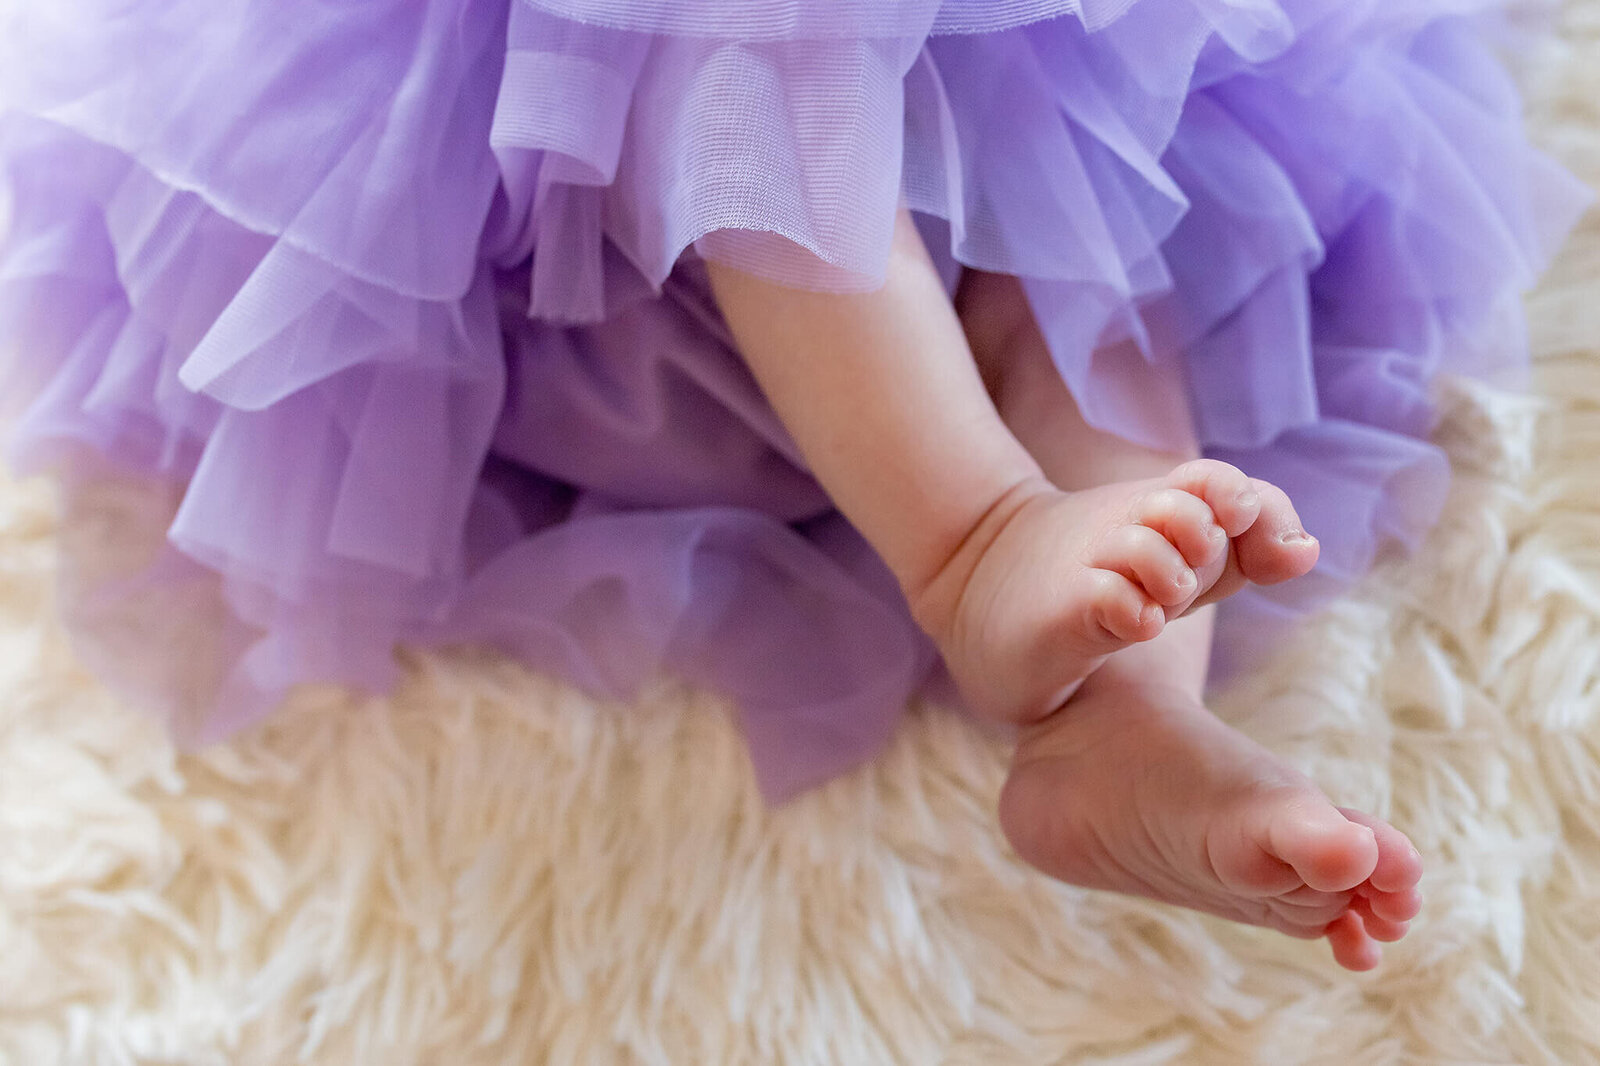 A close-up of a baby's toes during her Manassas newborn photography session.